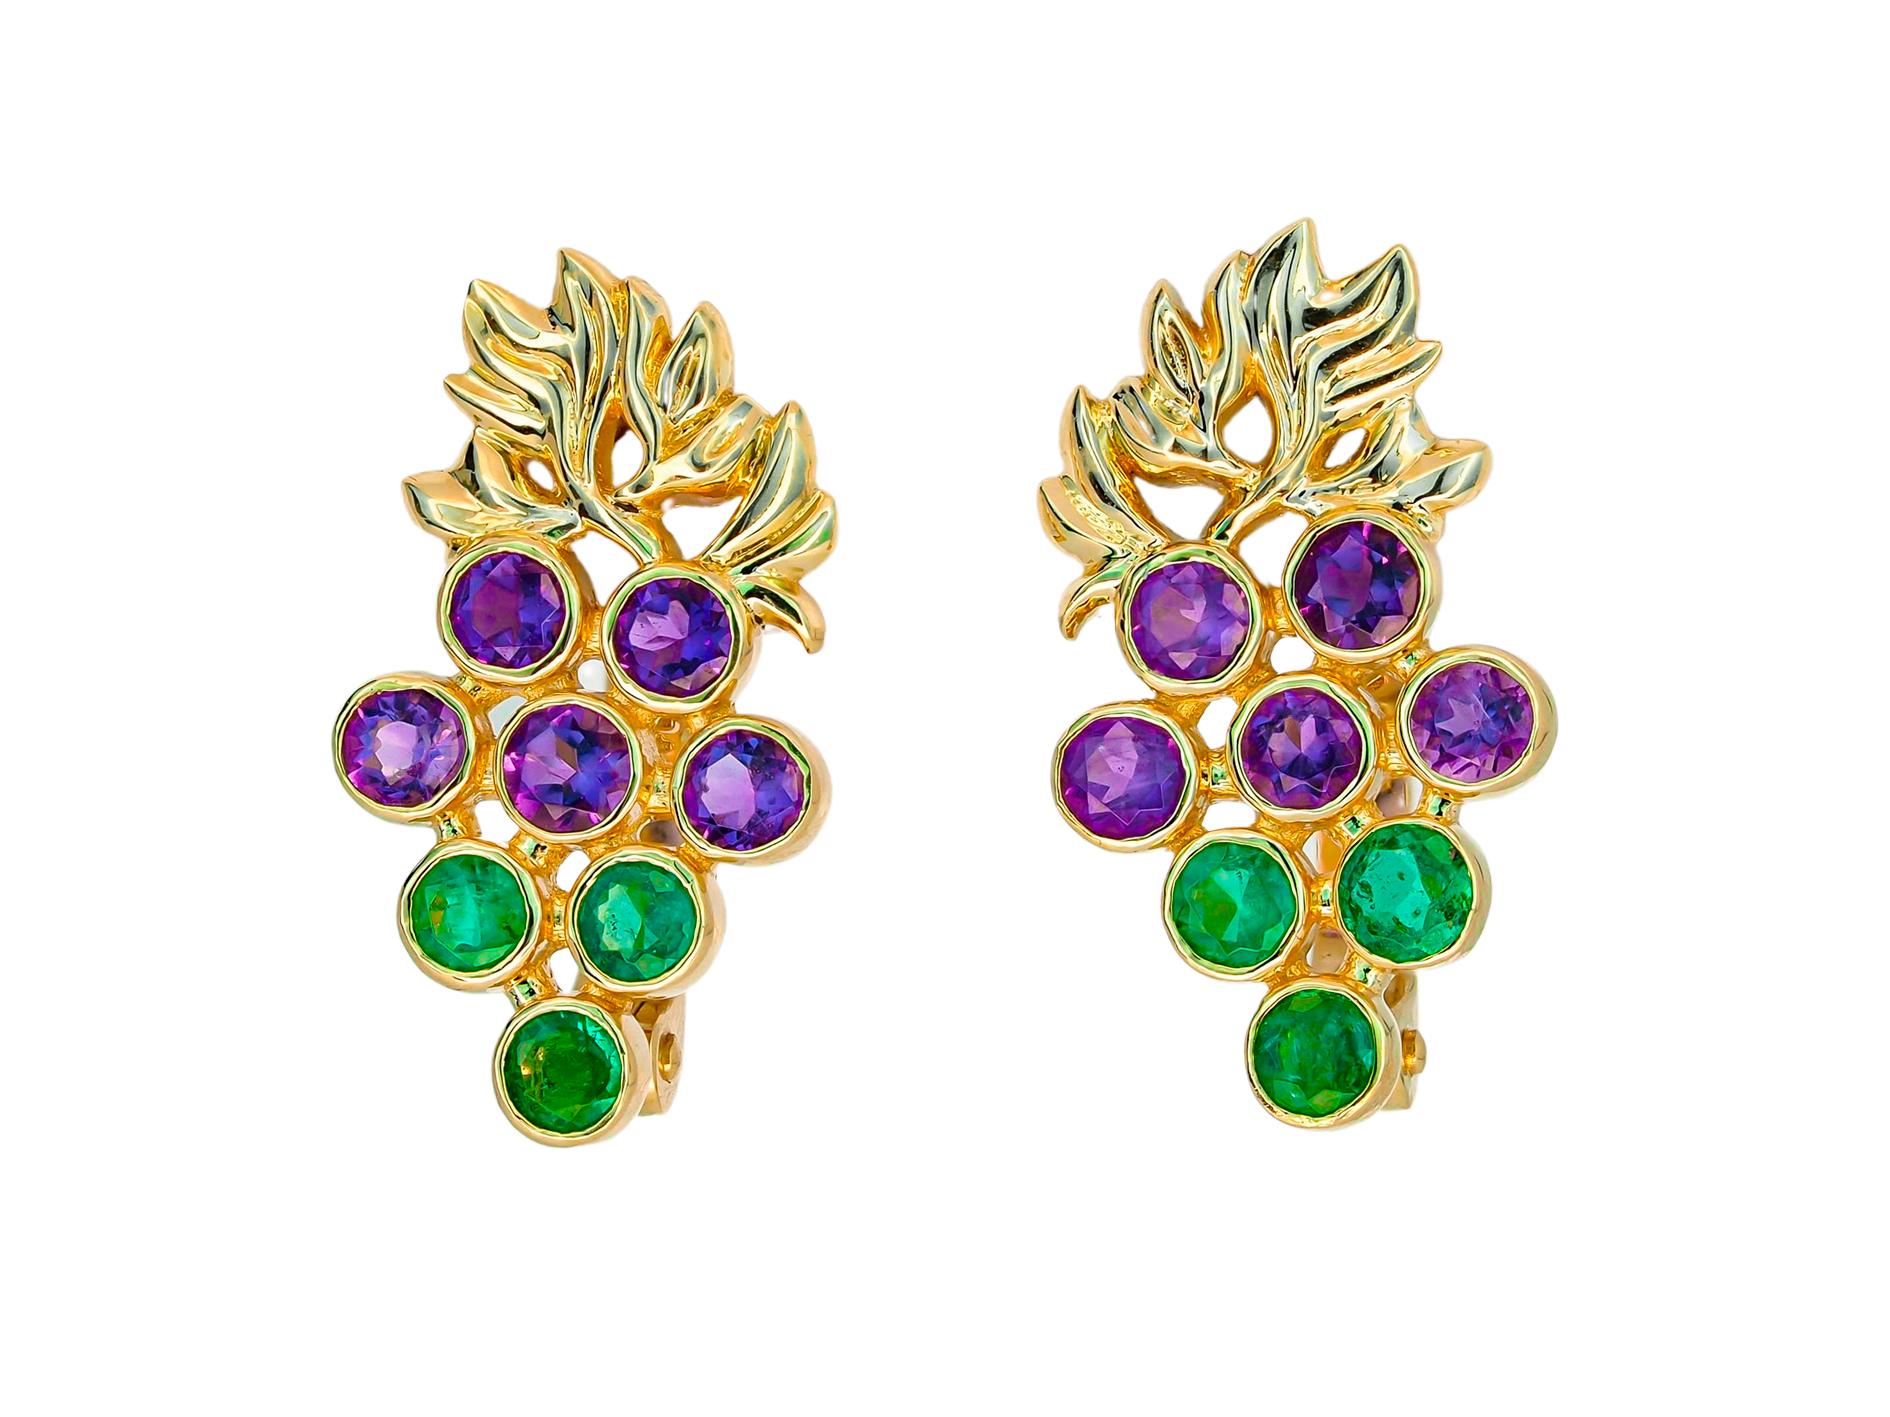 14k Gold Grape Earrings with Emeralds and Amethysts For Sale 11